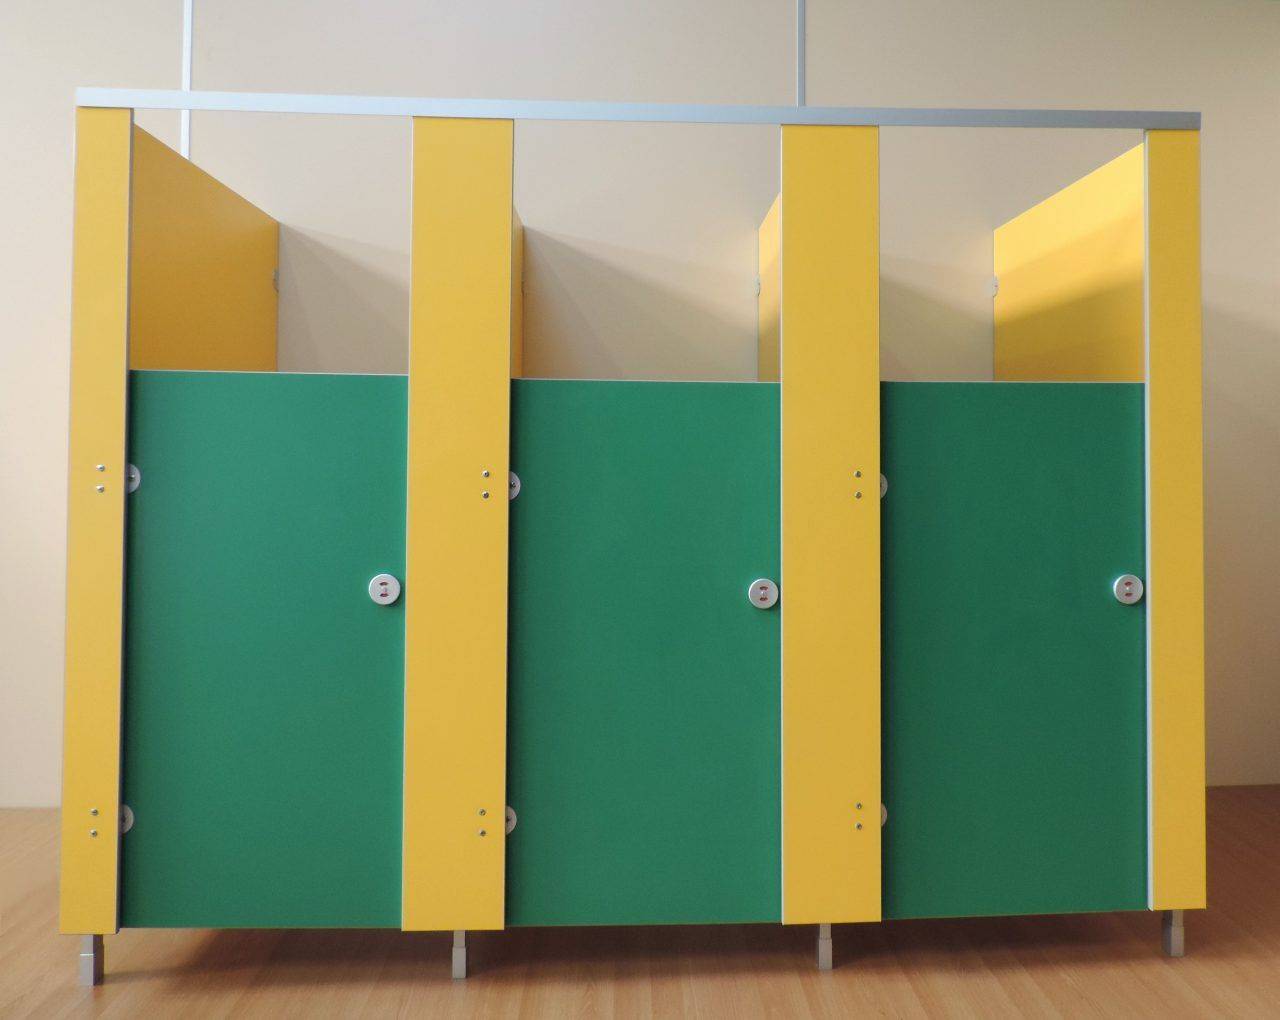 Designers Of Toilet Cubicles For Primary Schools UK